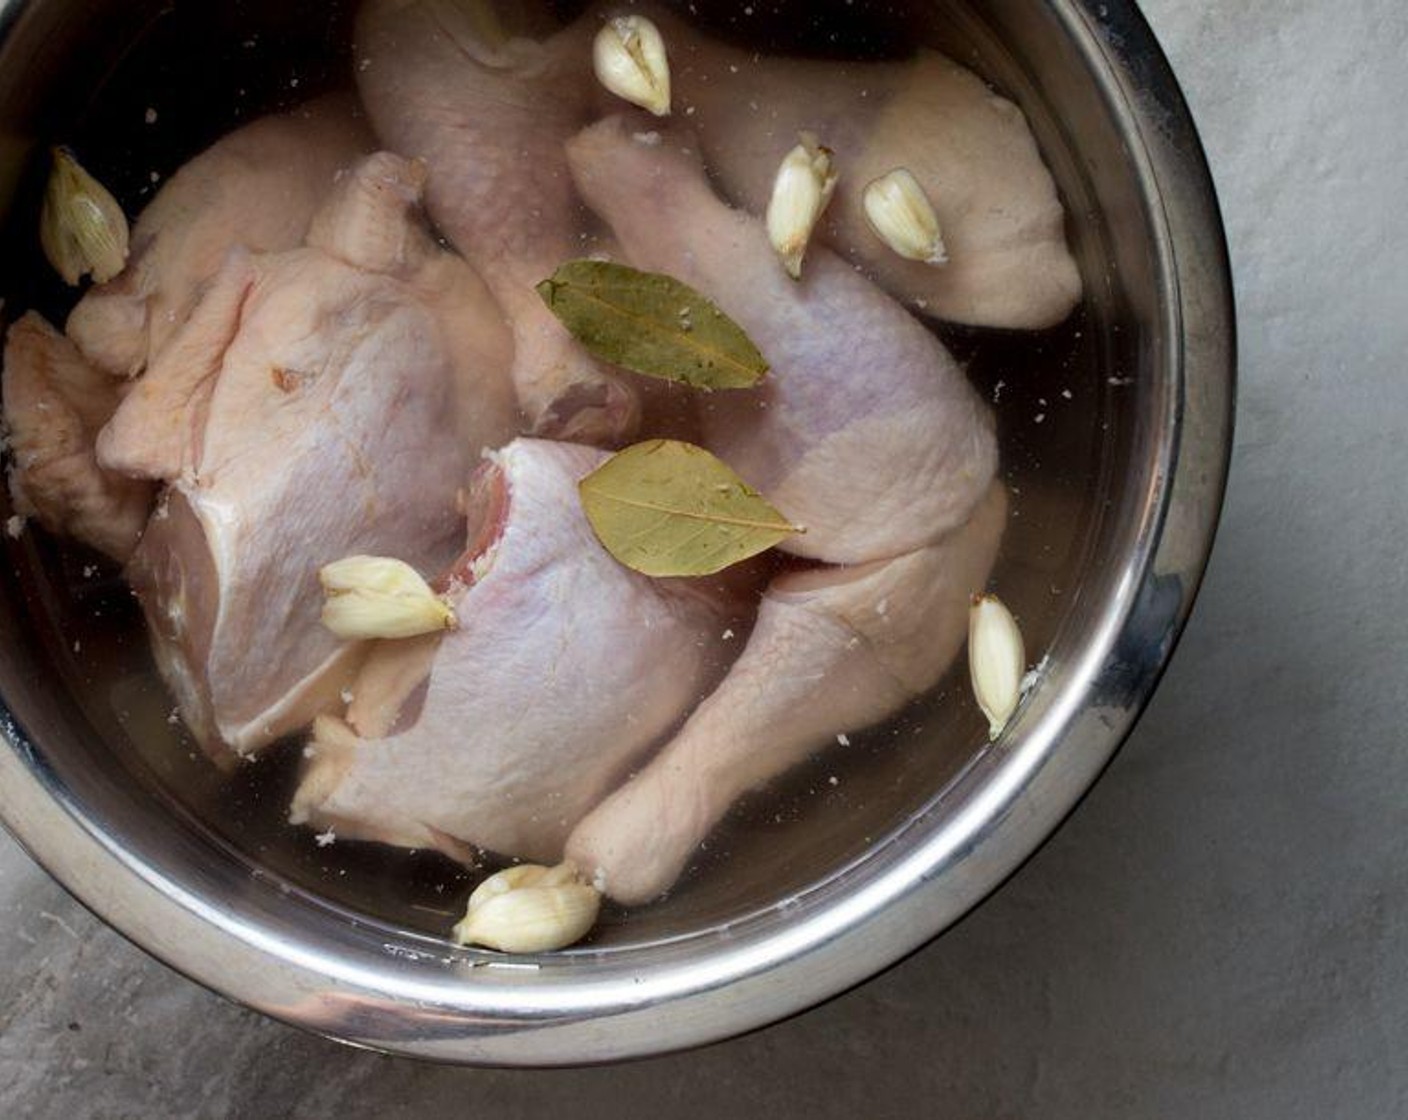 step 3 Add the chicken to the brine and let it sit for a minimum of 4 hours in the fridge or room temperature.